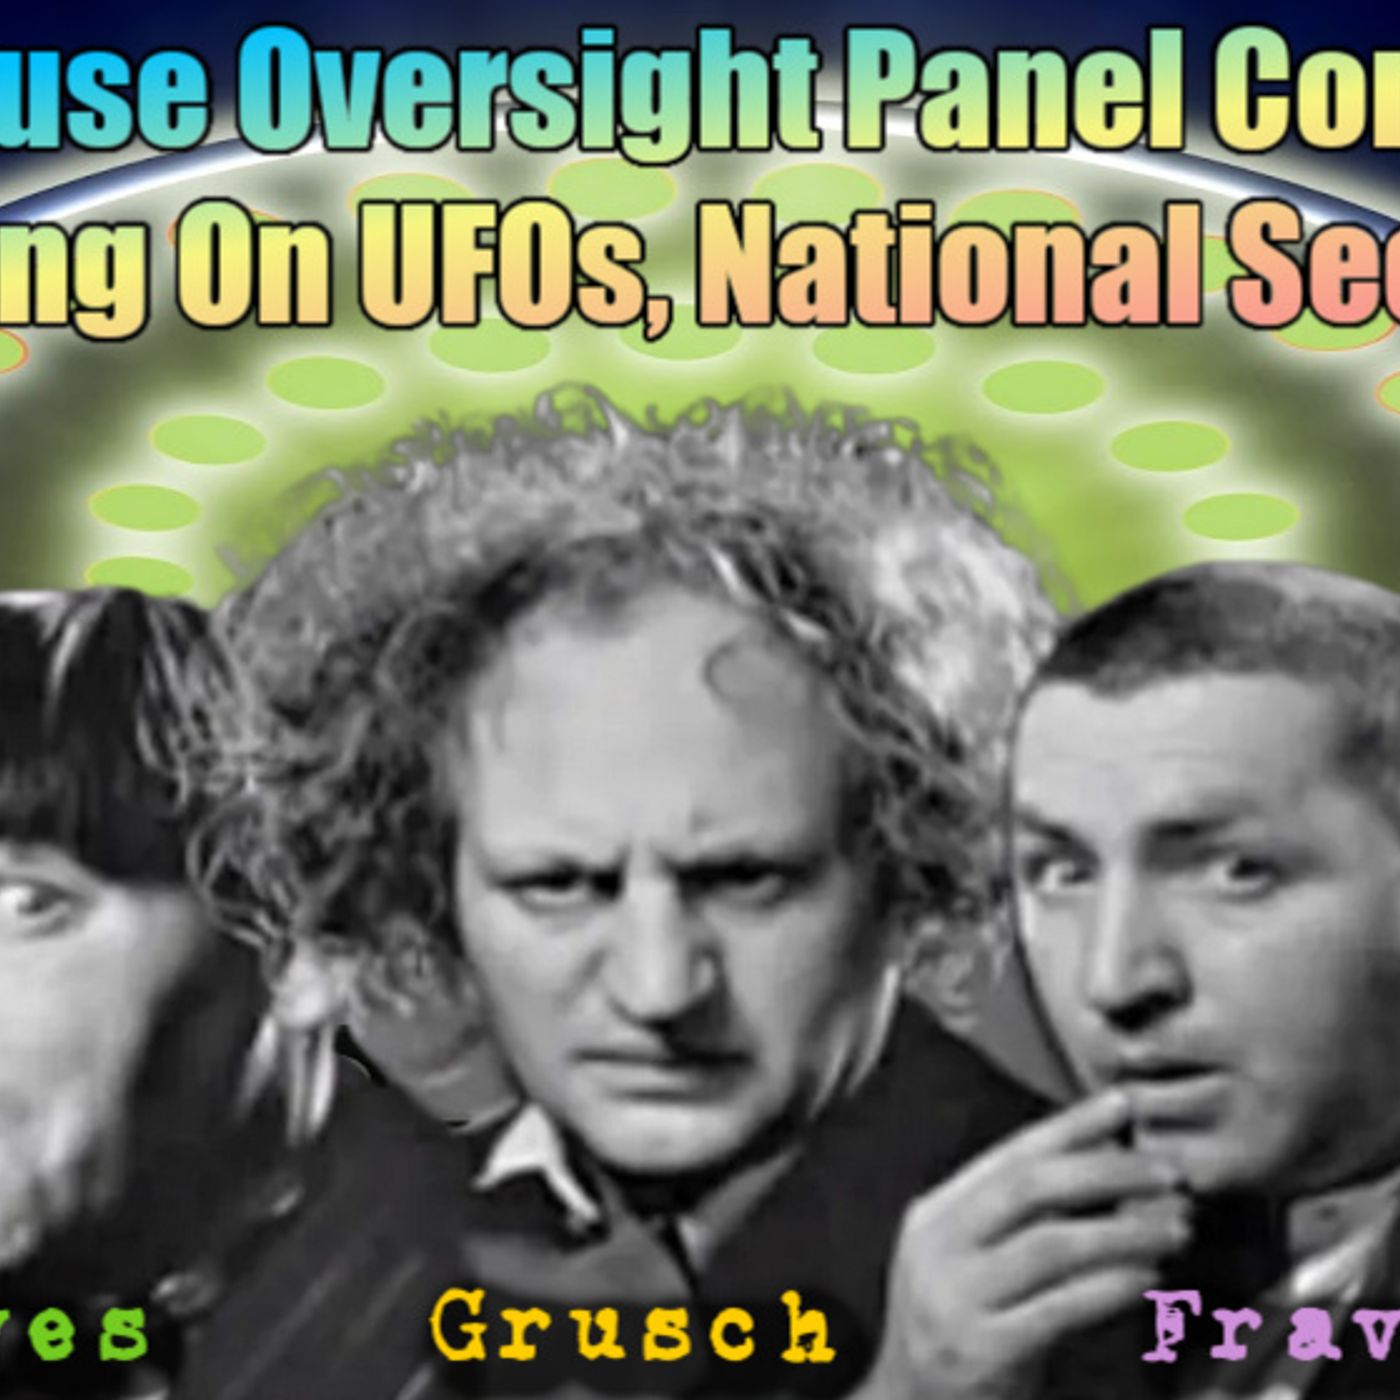 Congressional Hearing on July 26 2023 on UAPs - Witnesses Ryan Graves, David Grusch and Cdr. David Fravor - A Total Waste of Time!